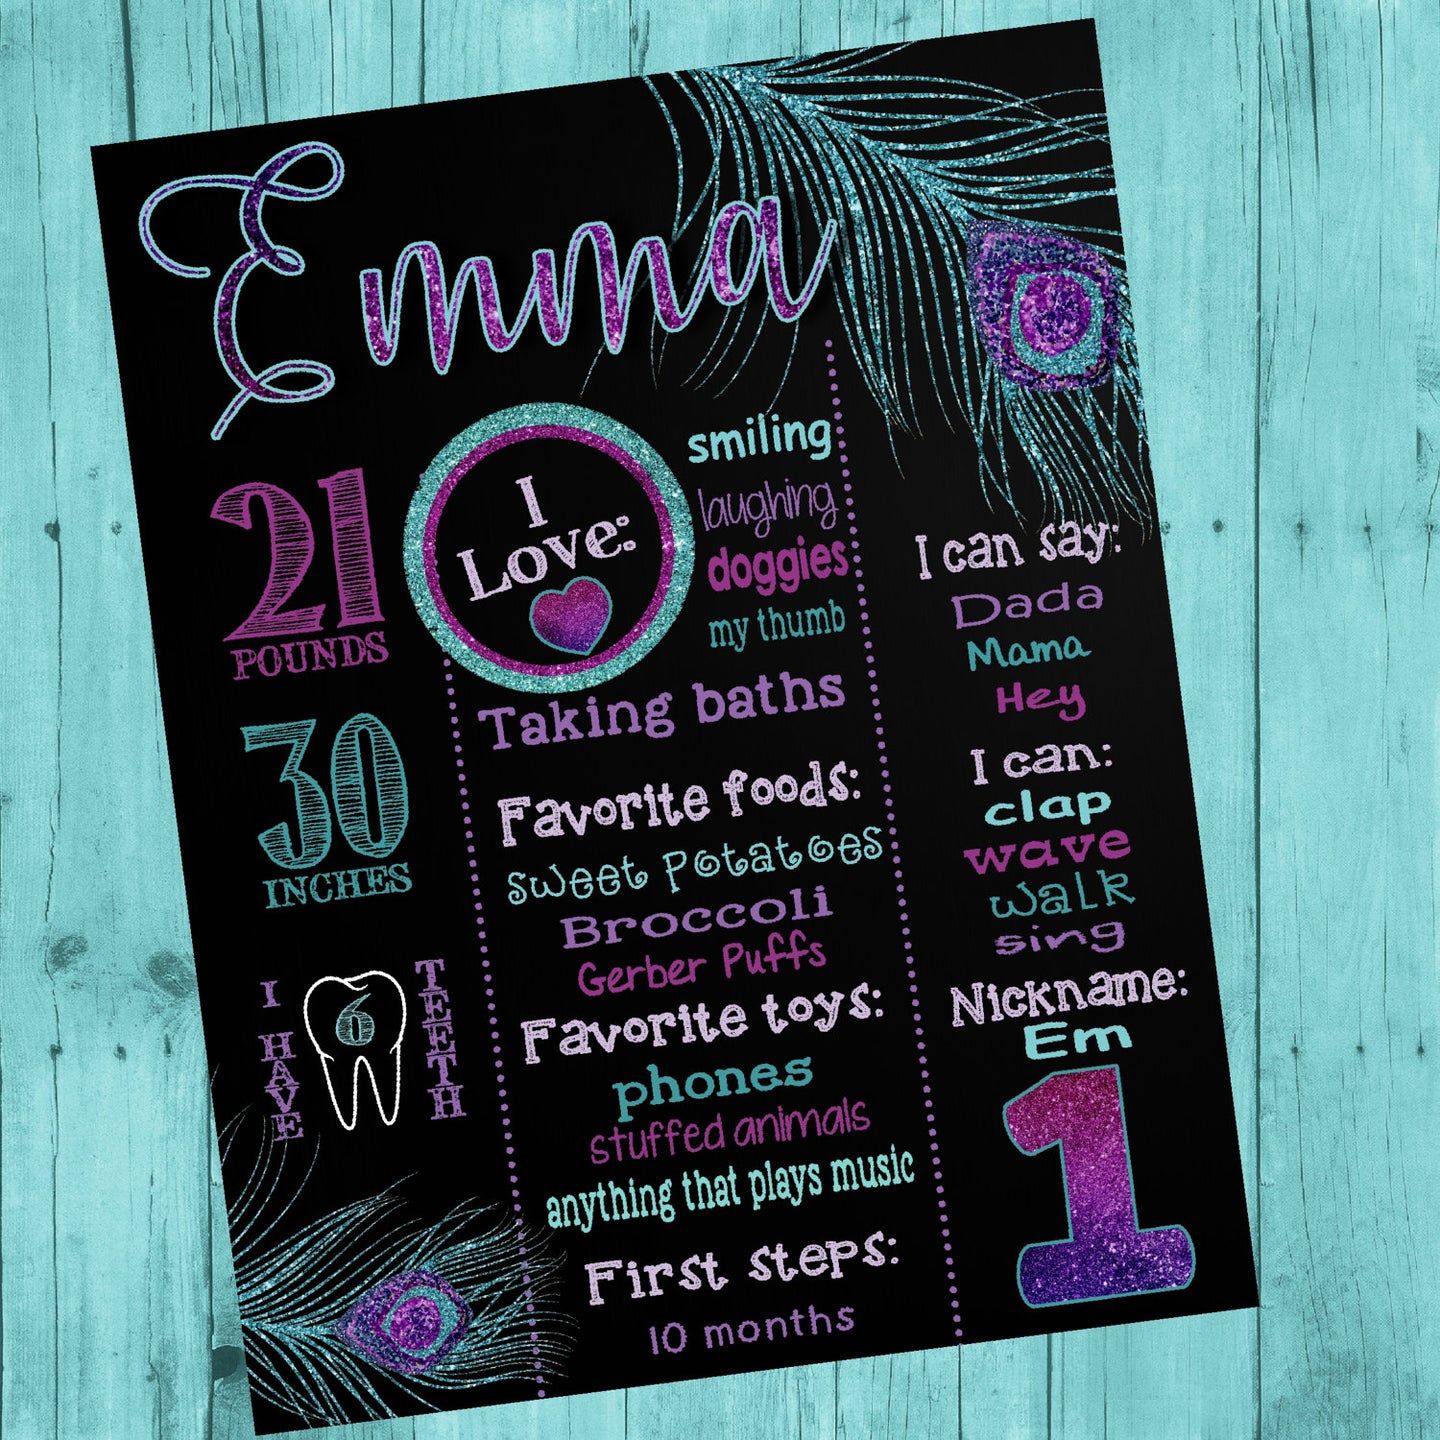 First birthday Chalkboard, Peacock,  First birthday chalk board, Peacock sign, Poster,  Glitter,  chalk,  Digital  16x20 photo prop